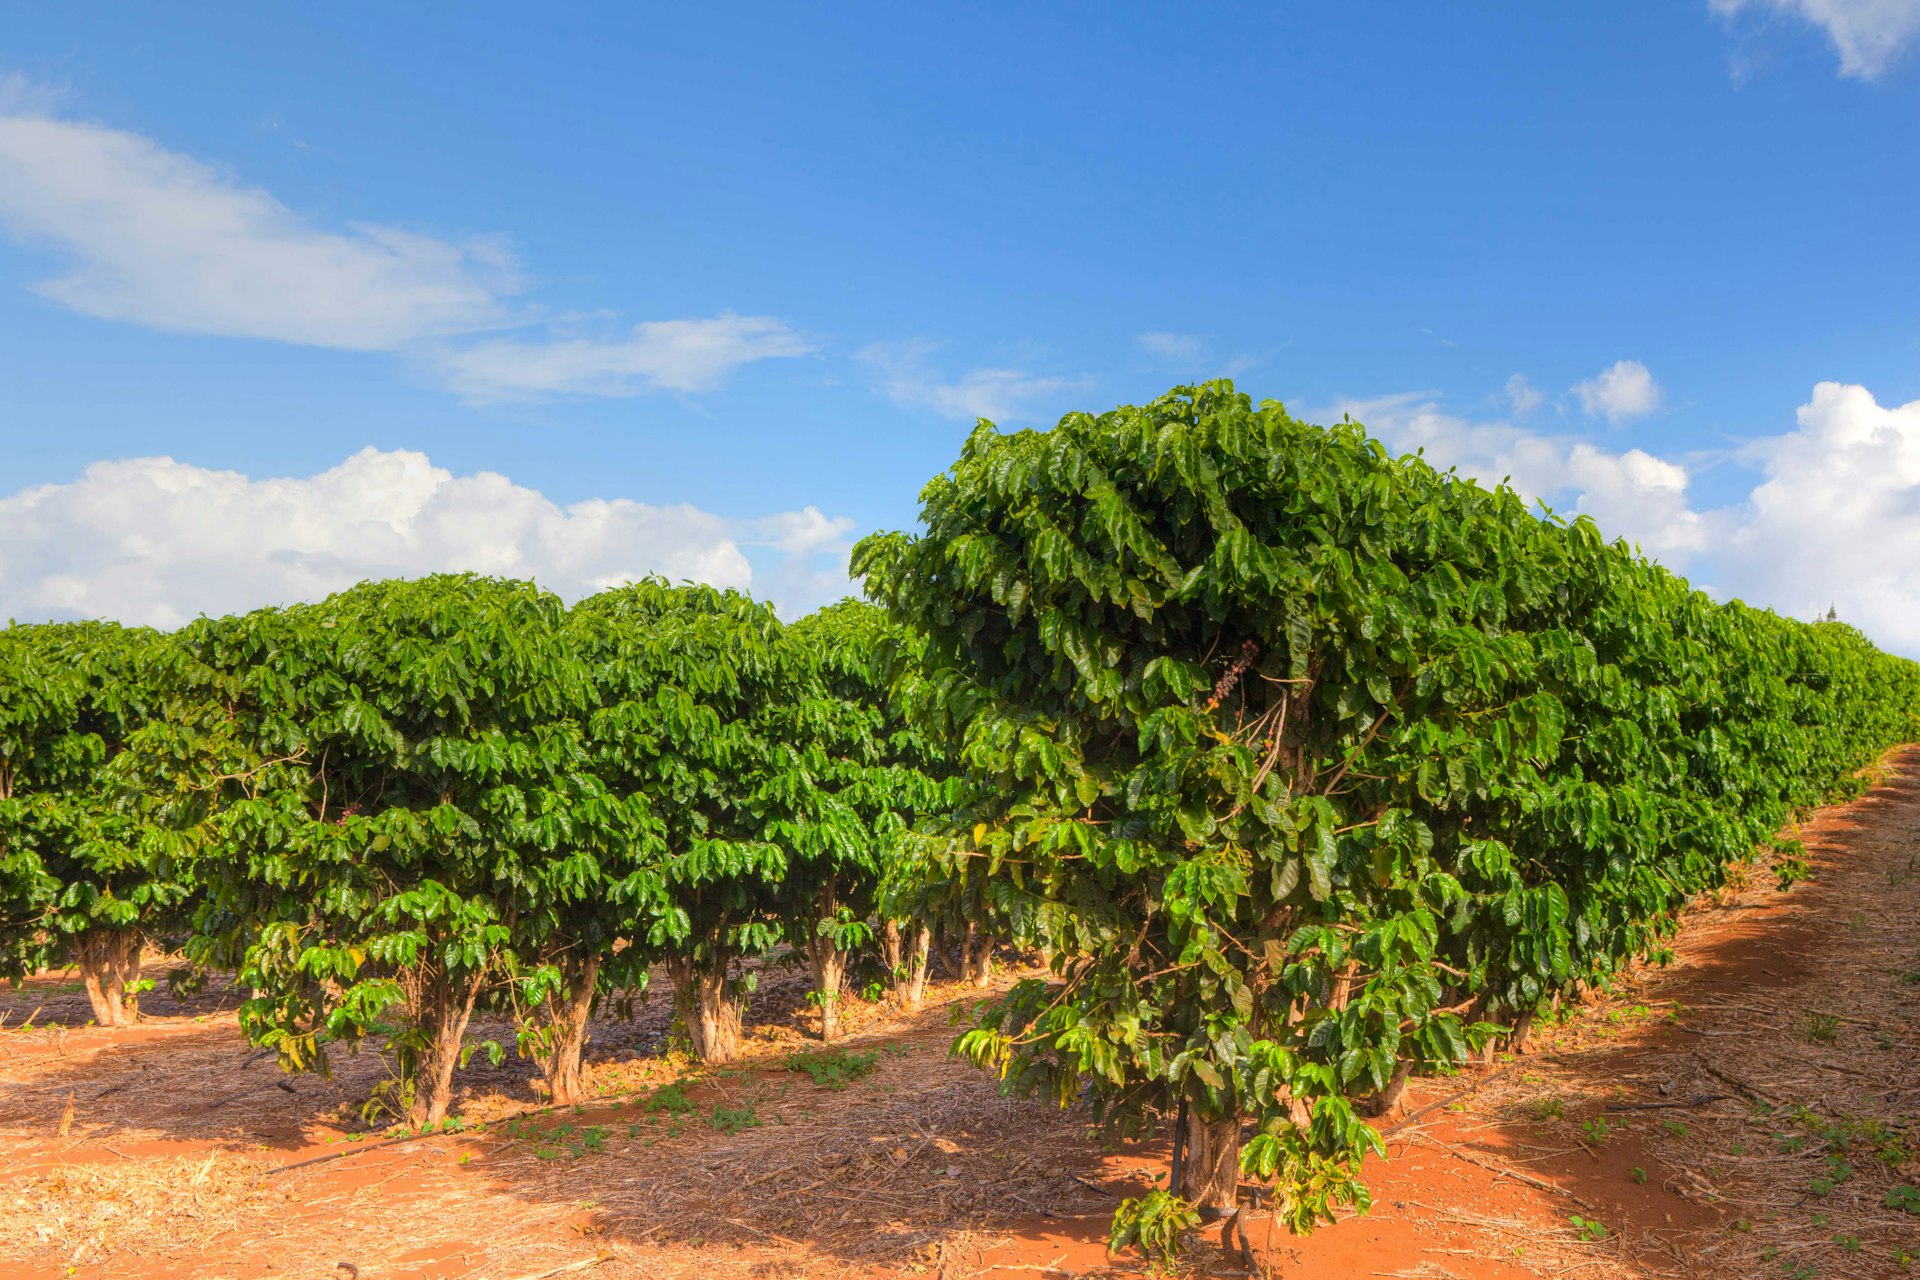 Coffee trees at a farm in Maui. Image by Dusty Pixel photography / Moment Open / Getty